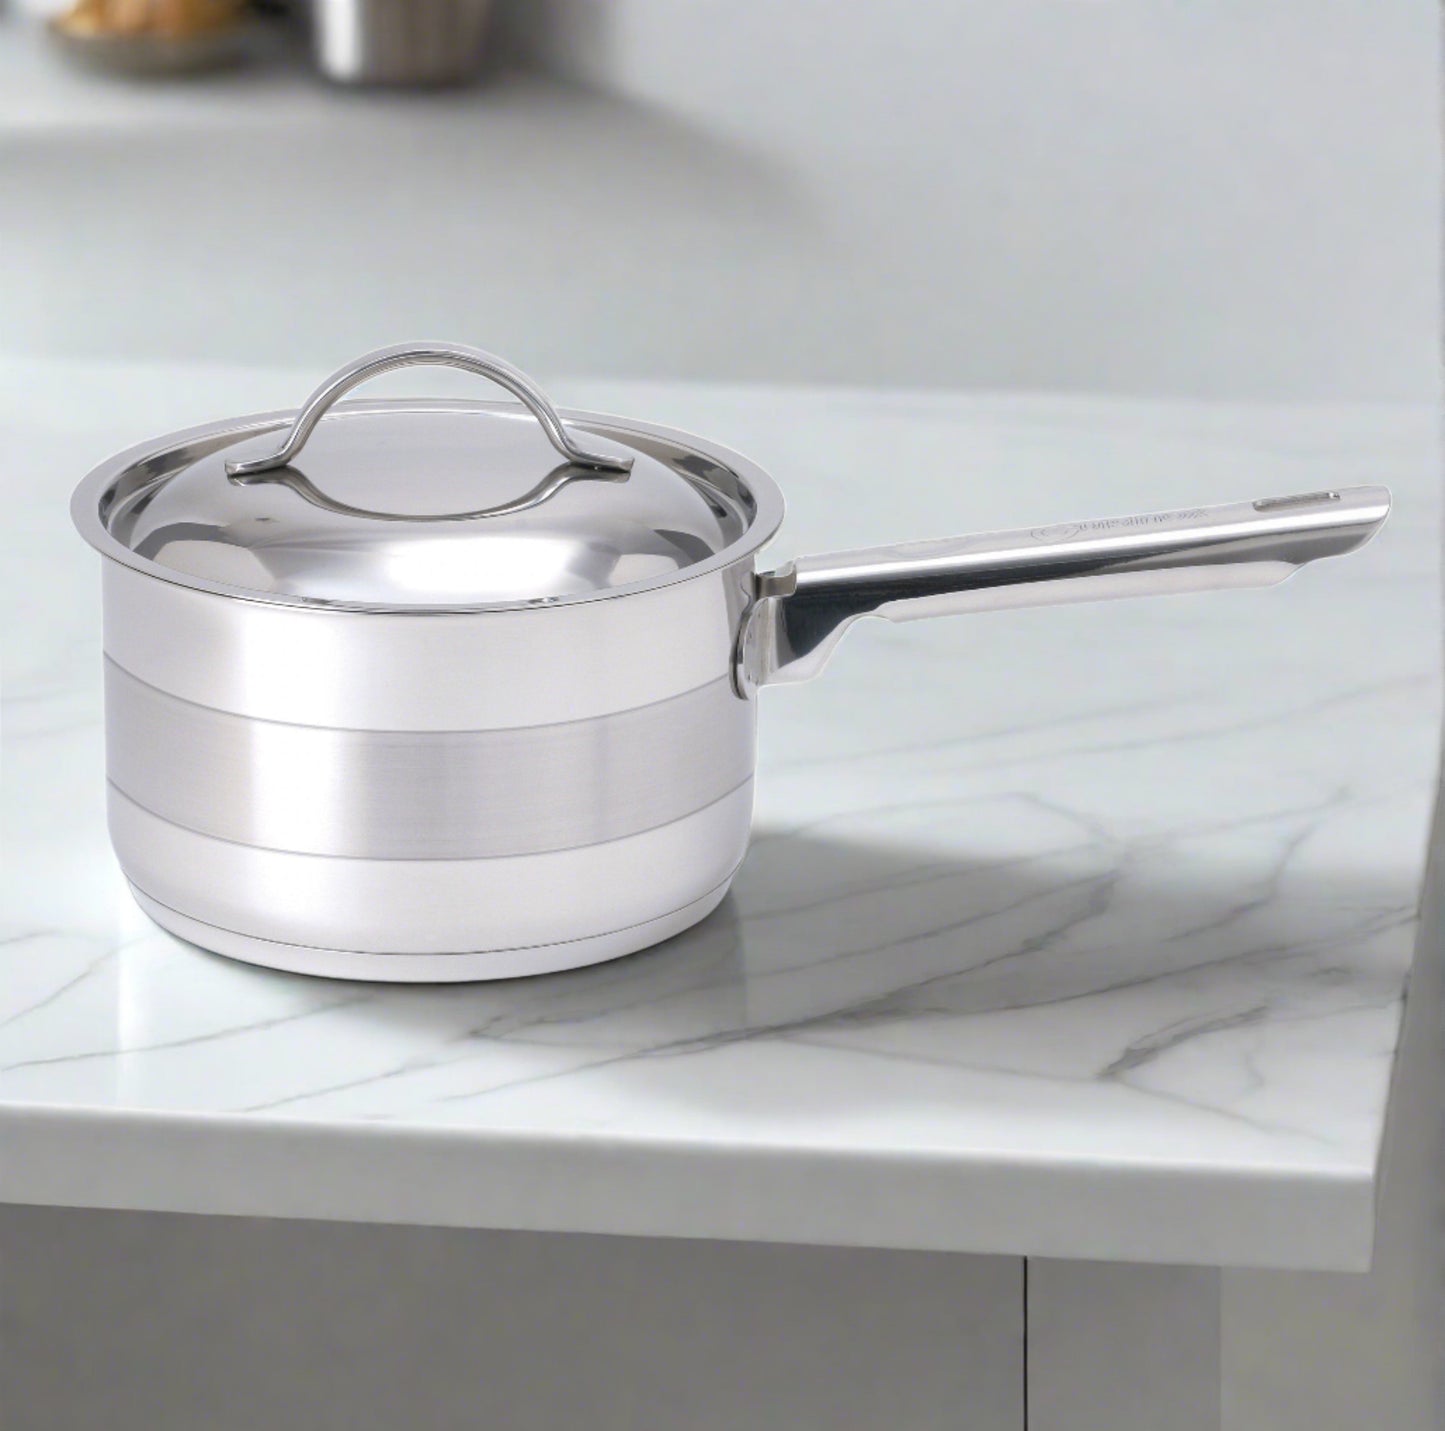 Cuisinox Gourmet 2 quart Spouted Saucepan with Lid